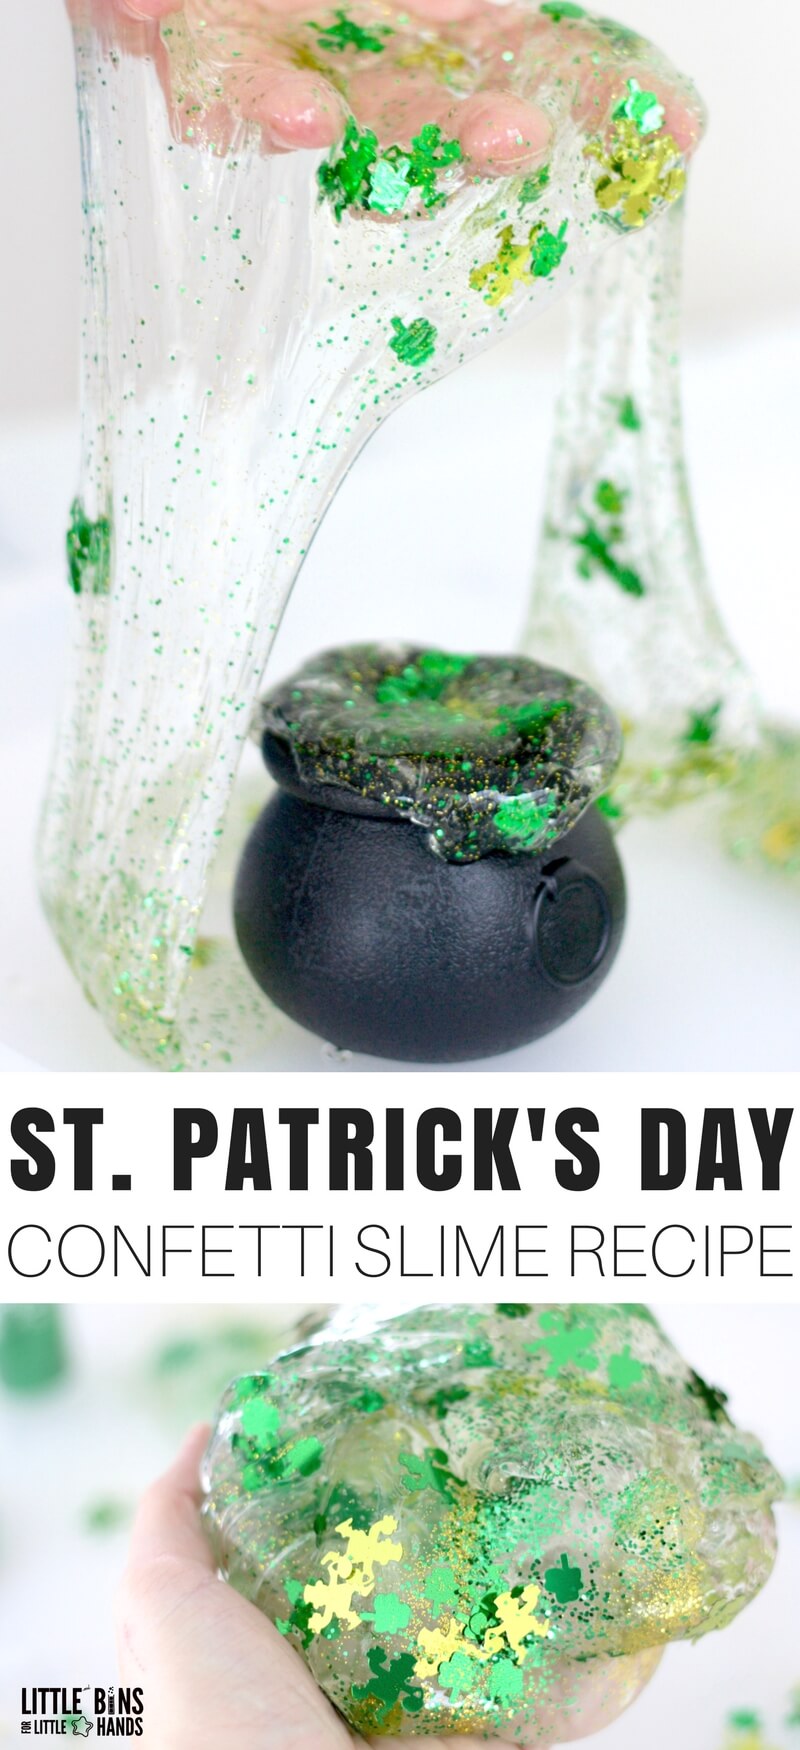 Leprechauns, glitter, confetti, gold coins, oh my! Fill a little black kettle with our amazingly easy to make St Patricks day slime recipe and watch it ooze out! We love our homemade slime recipes and know you will to. Slime making is our mission, and we want you to be able to make the best slime recipes ever!